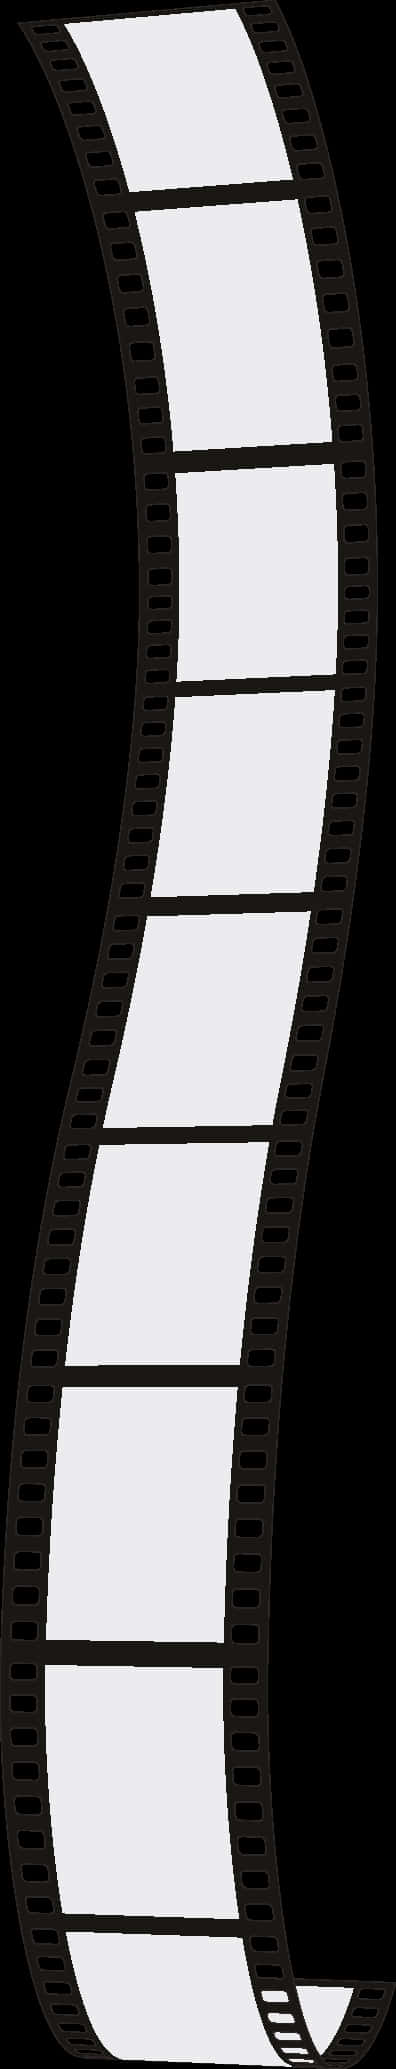 Blank Film Strip Graphic PNG